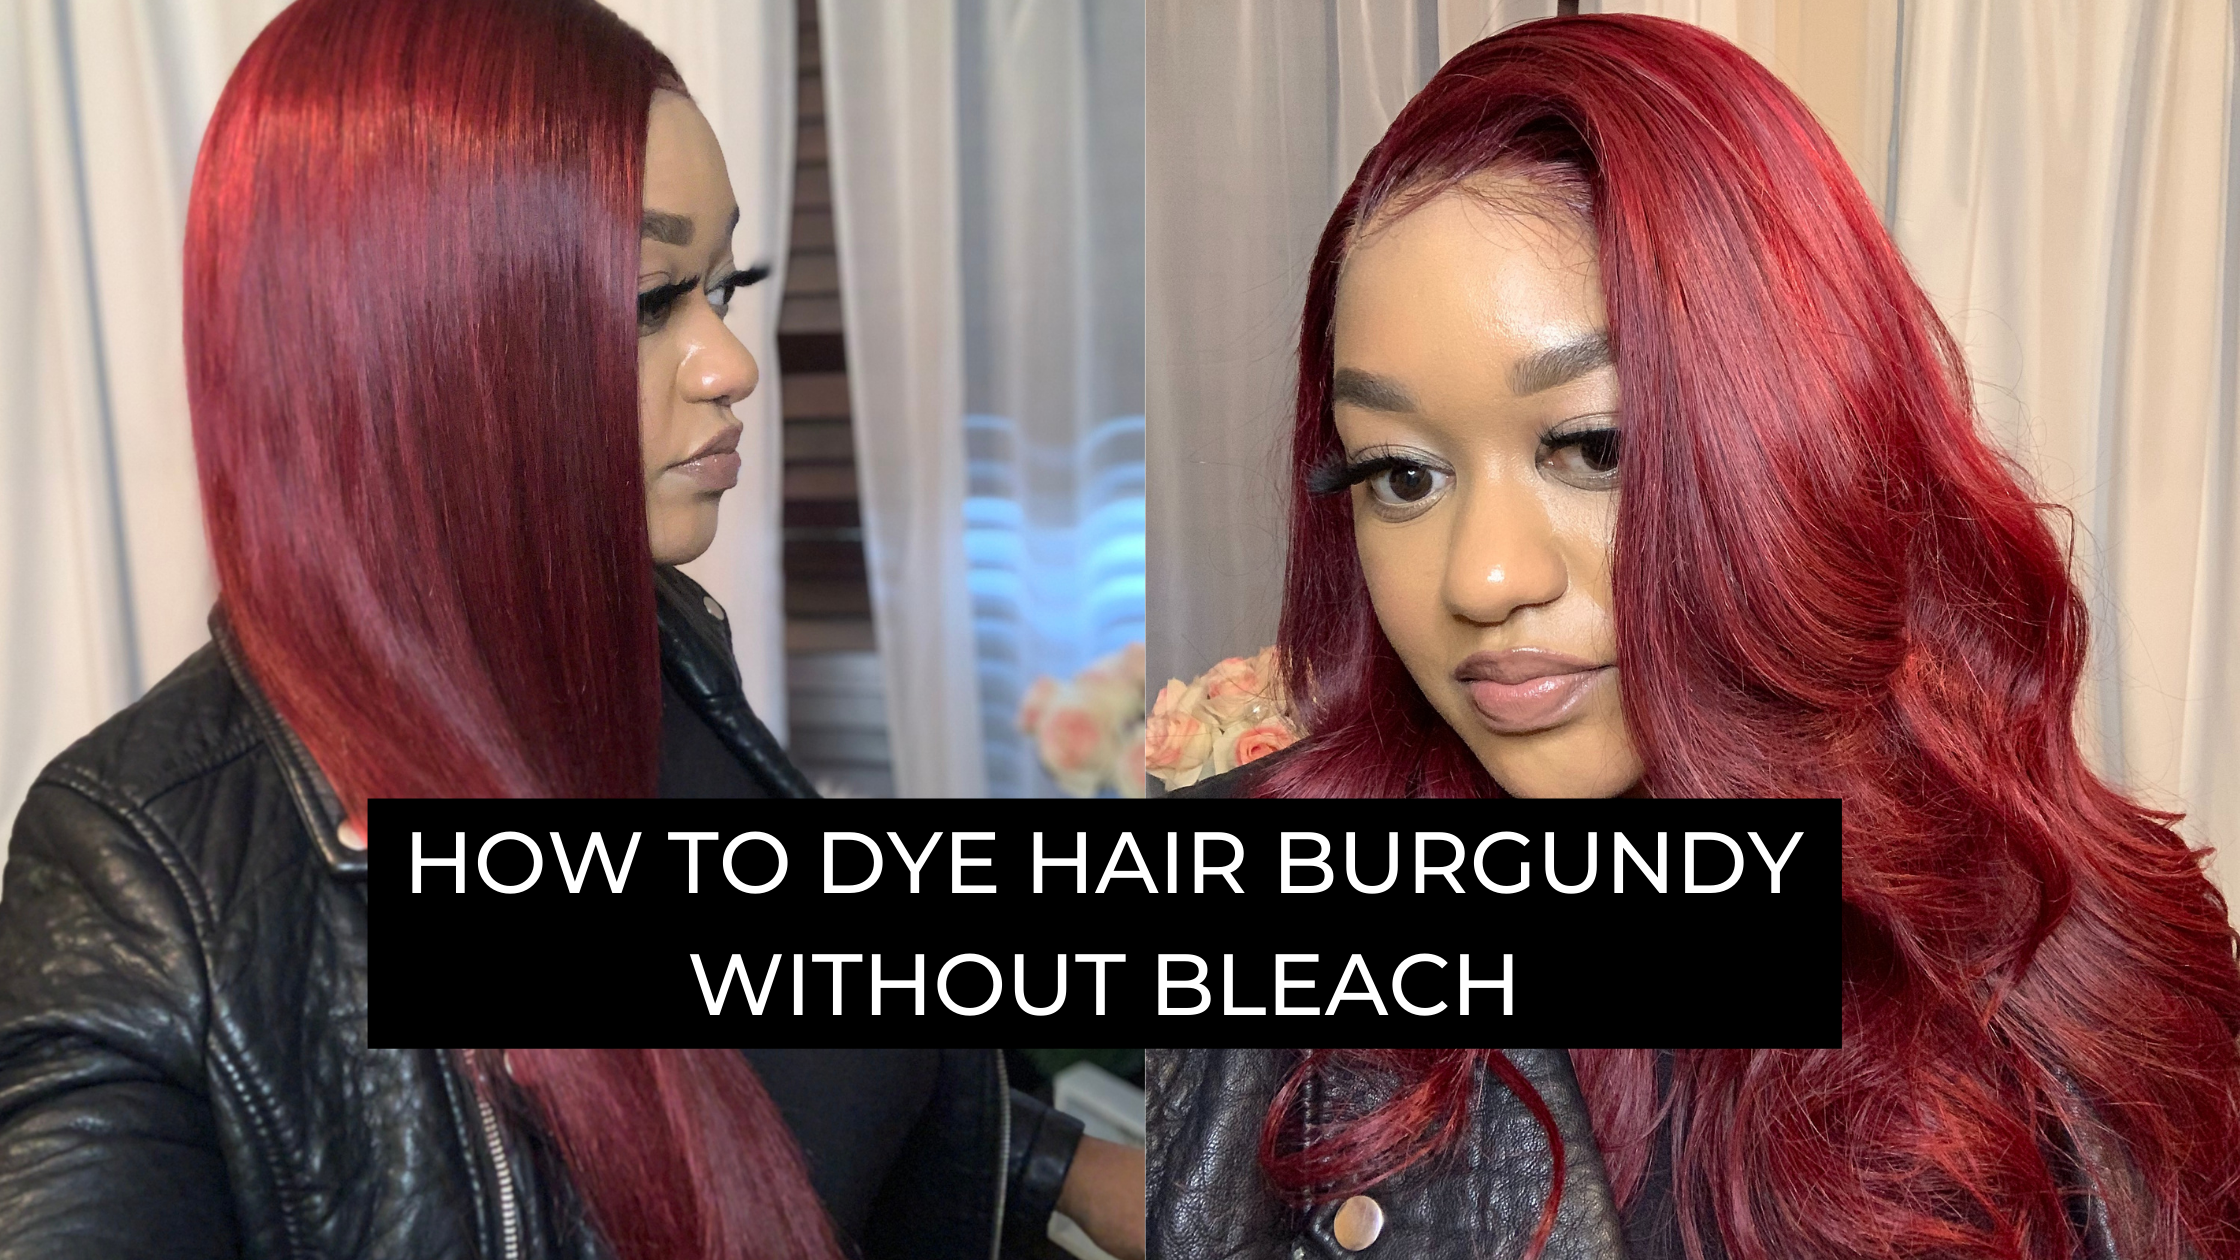 How To Dye Your Hair Burgundy Without Bleach | Bomb Dot Com Hair